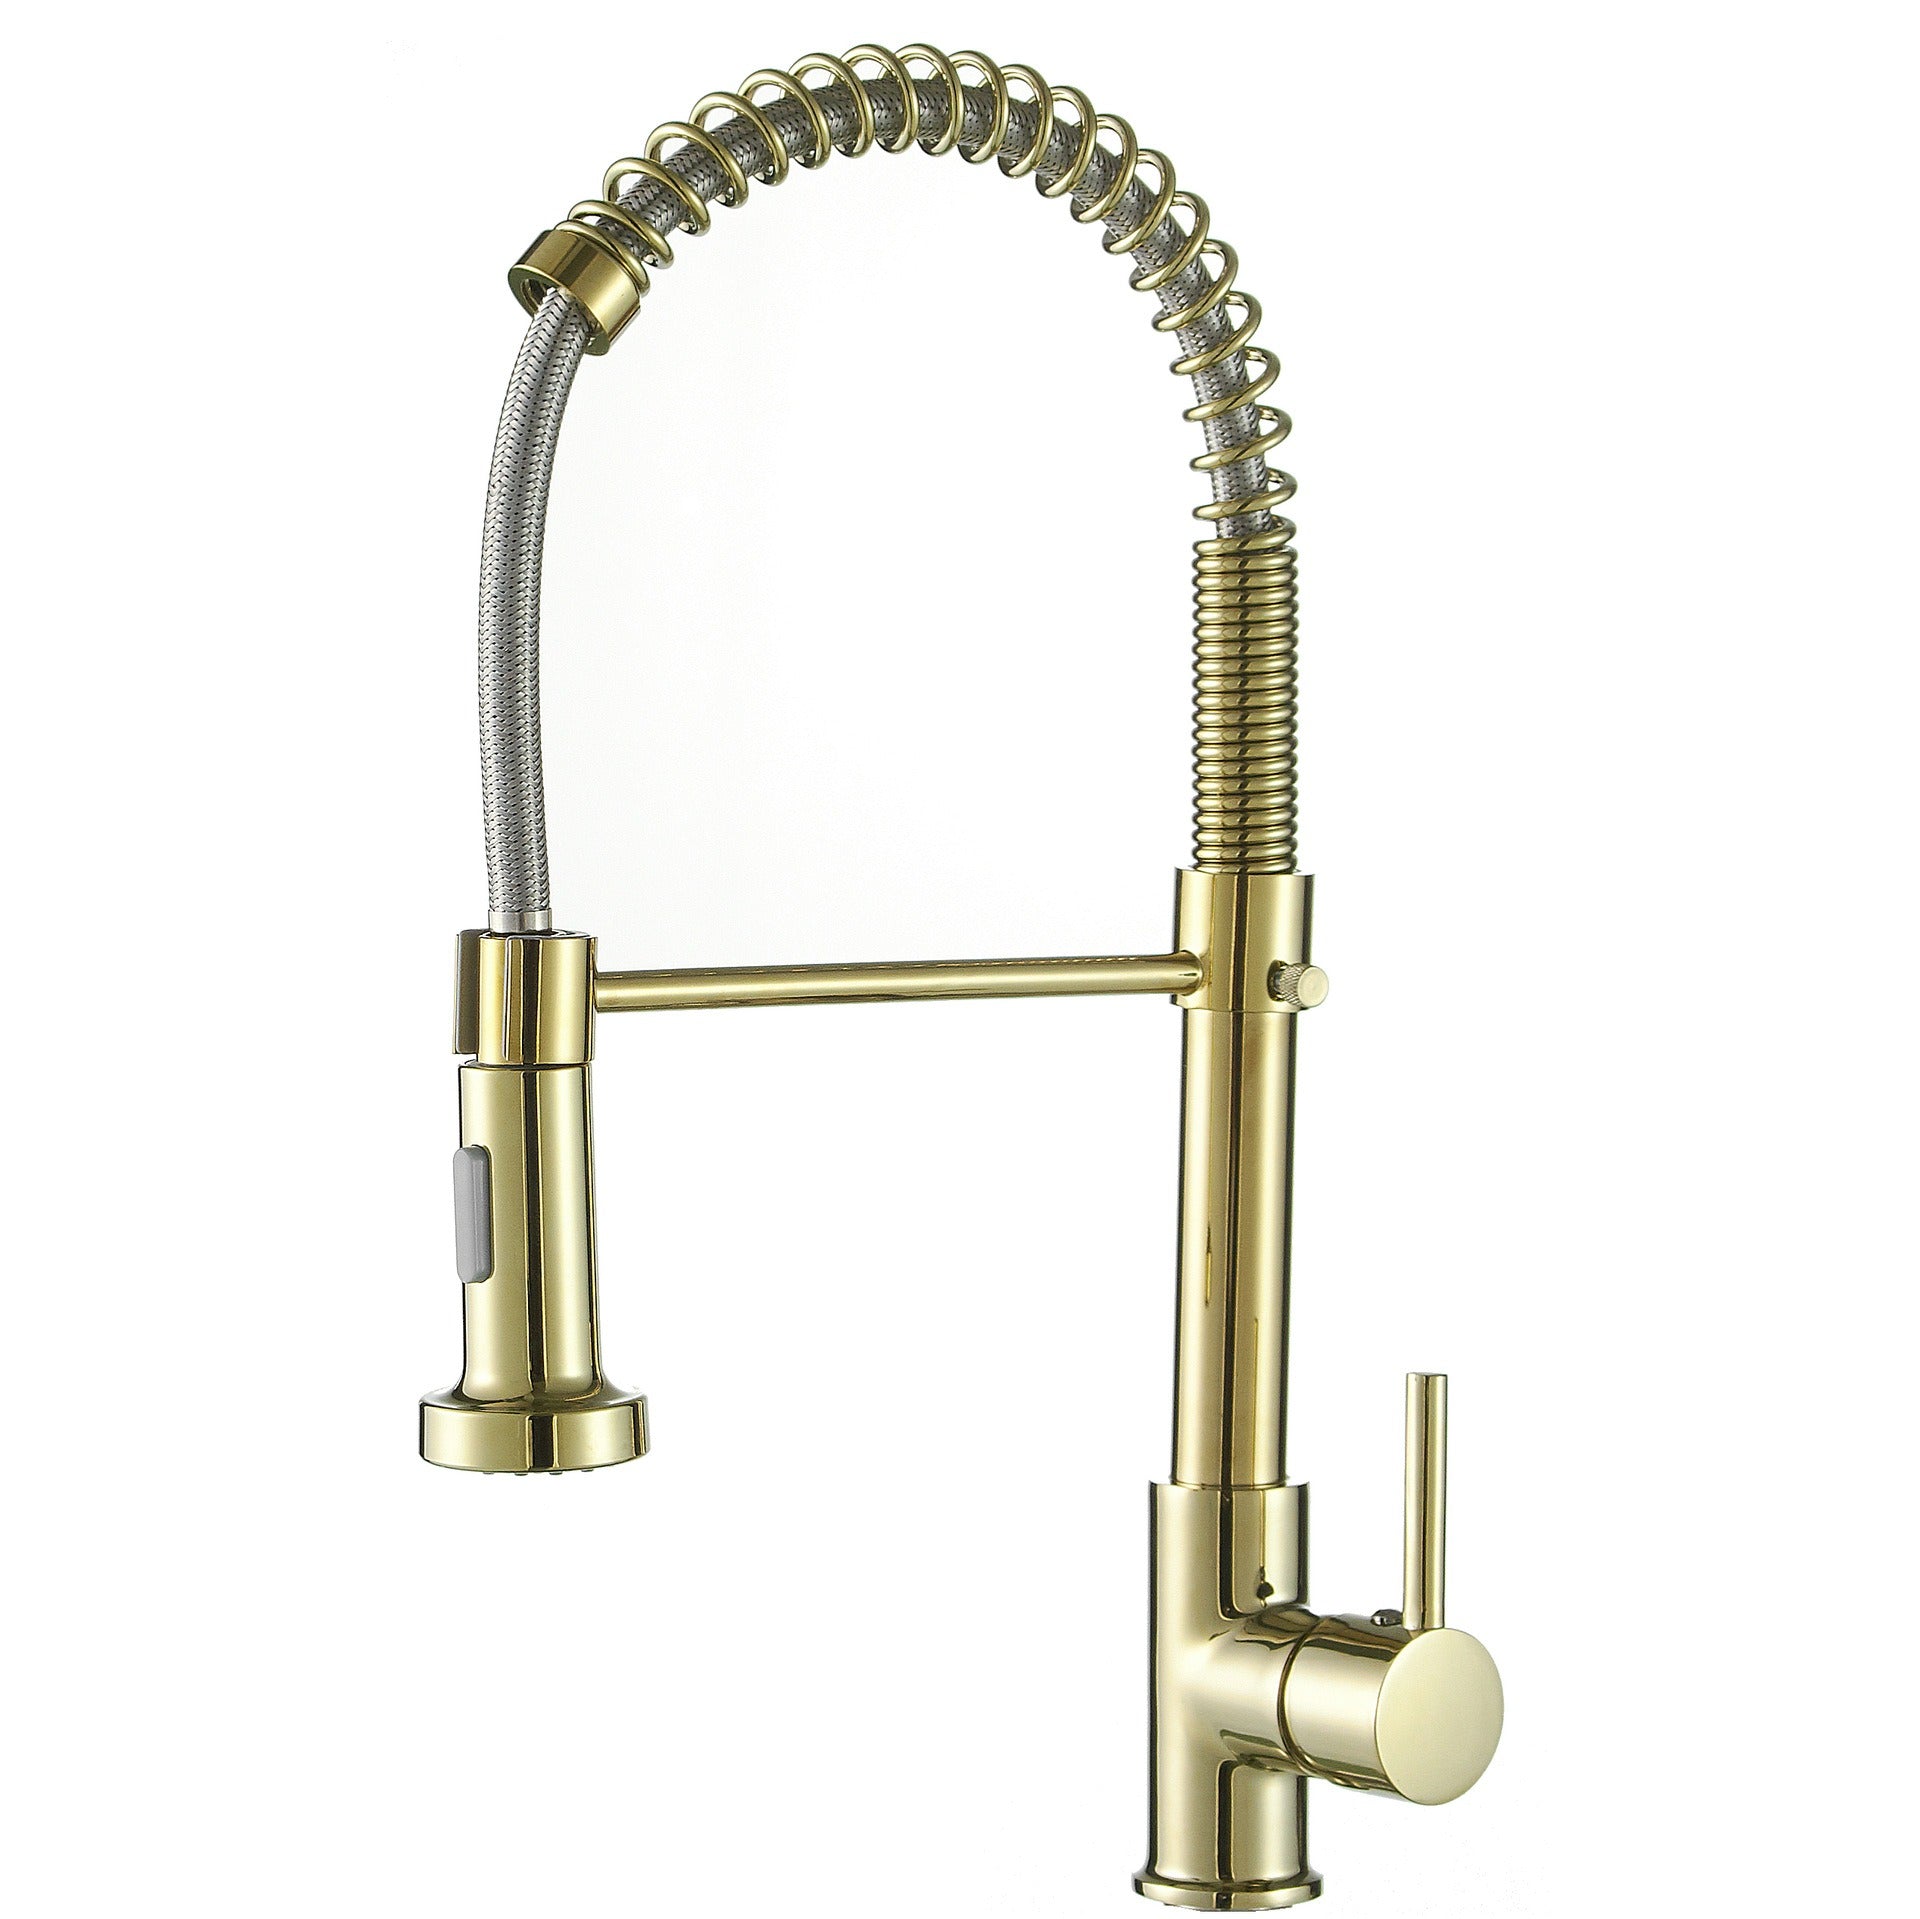 All copper spring faucet, kitchen sink with rotatable pull-out paint, black and gold dots